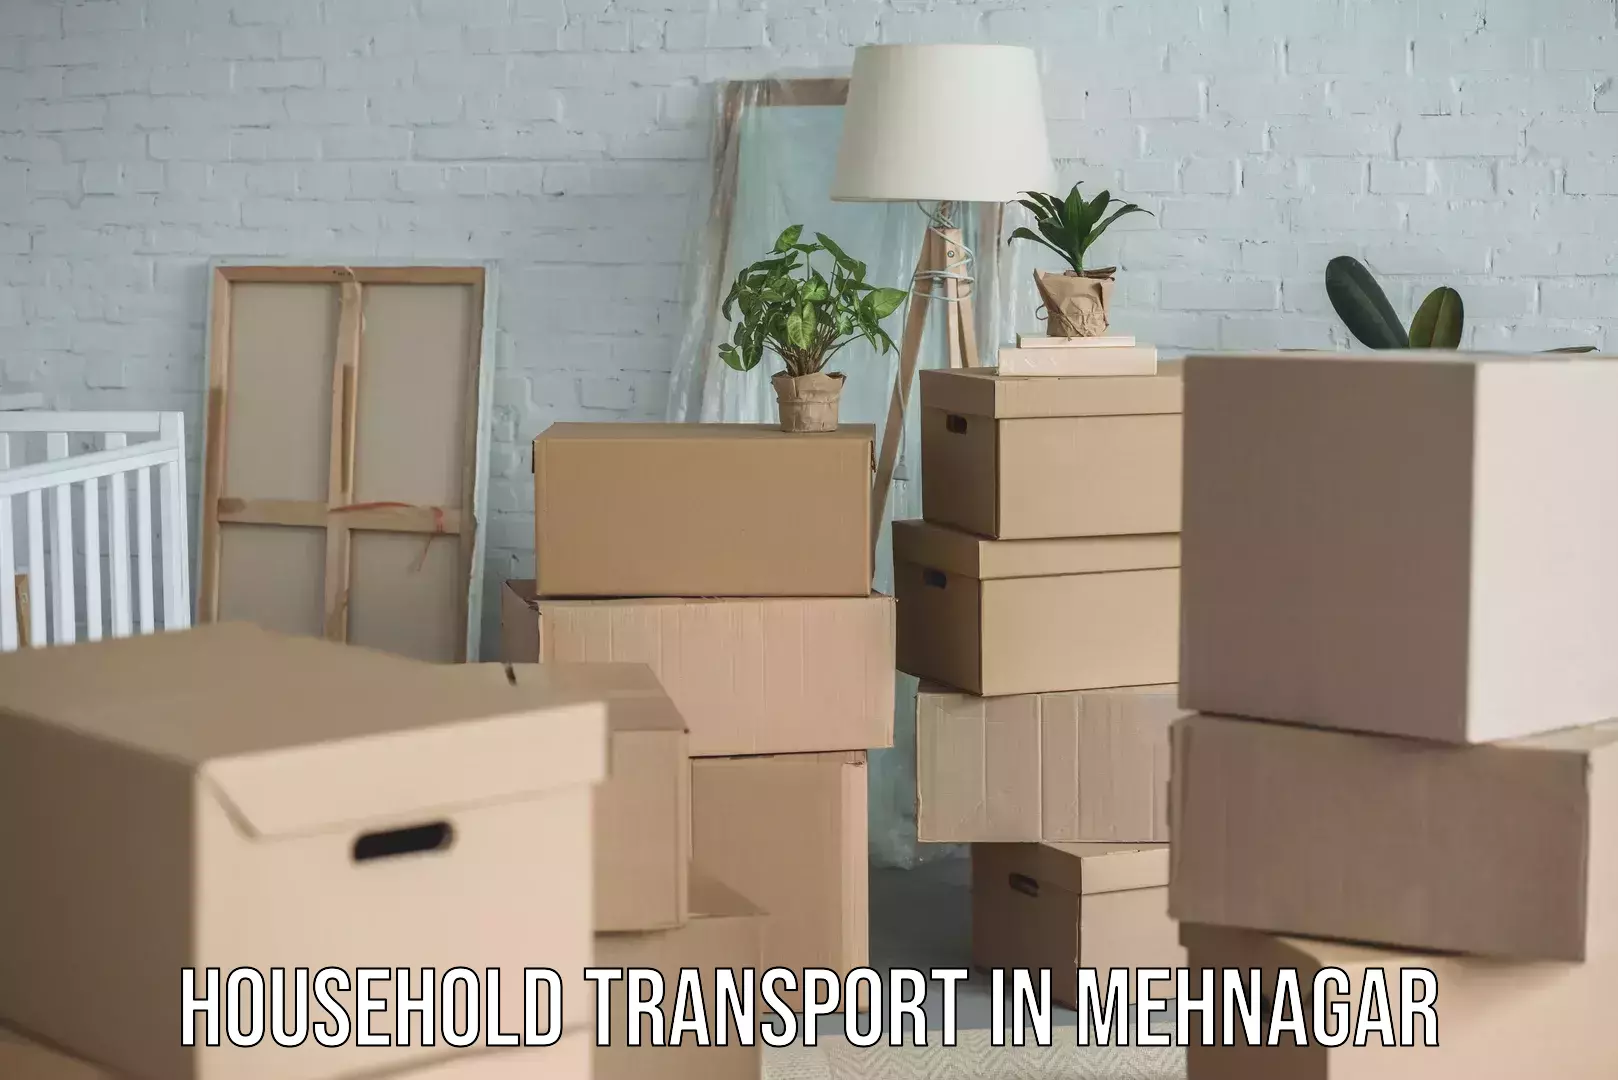 Trusted home movers in Mehnagar